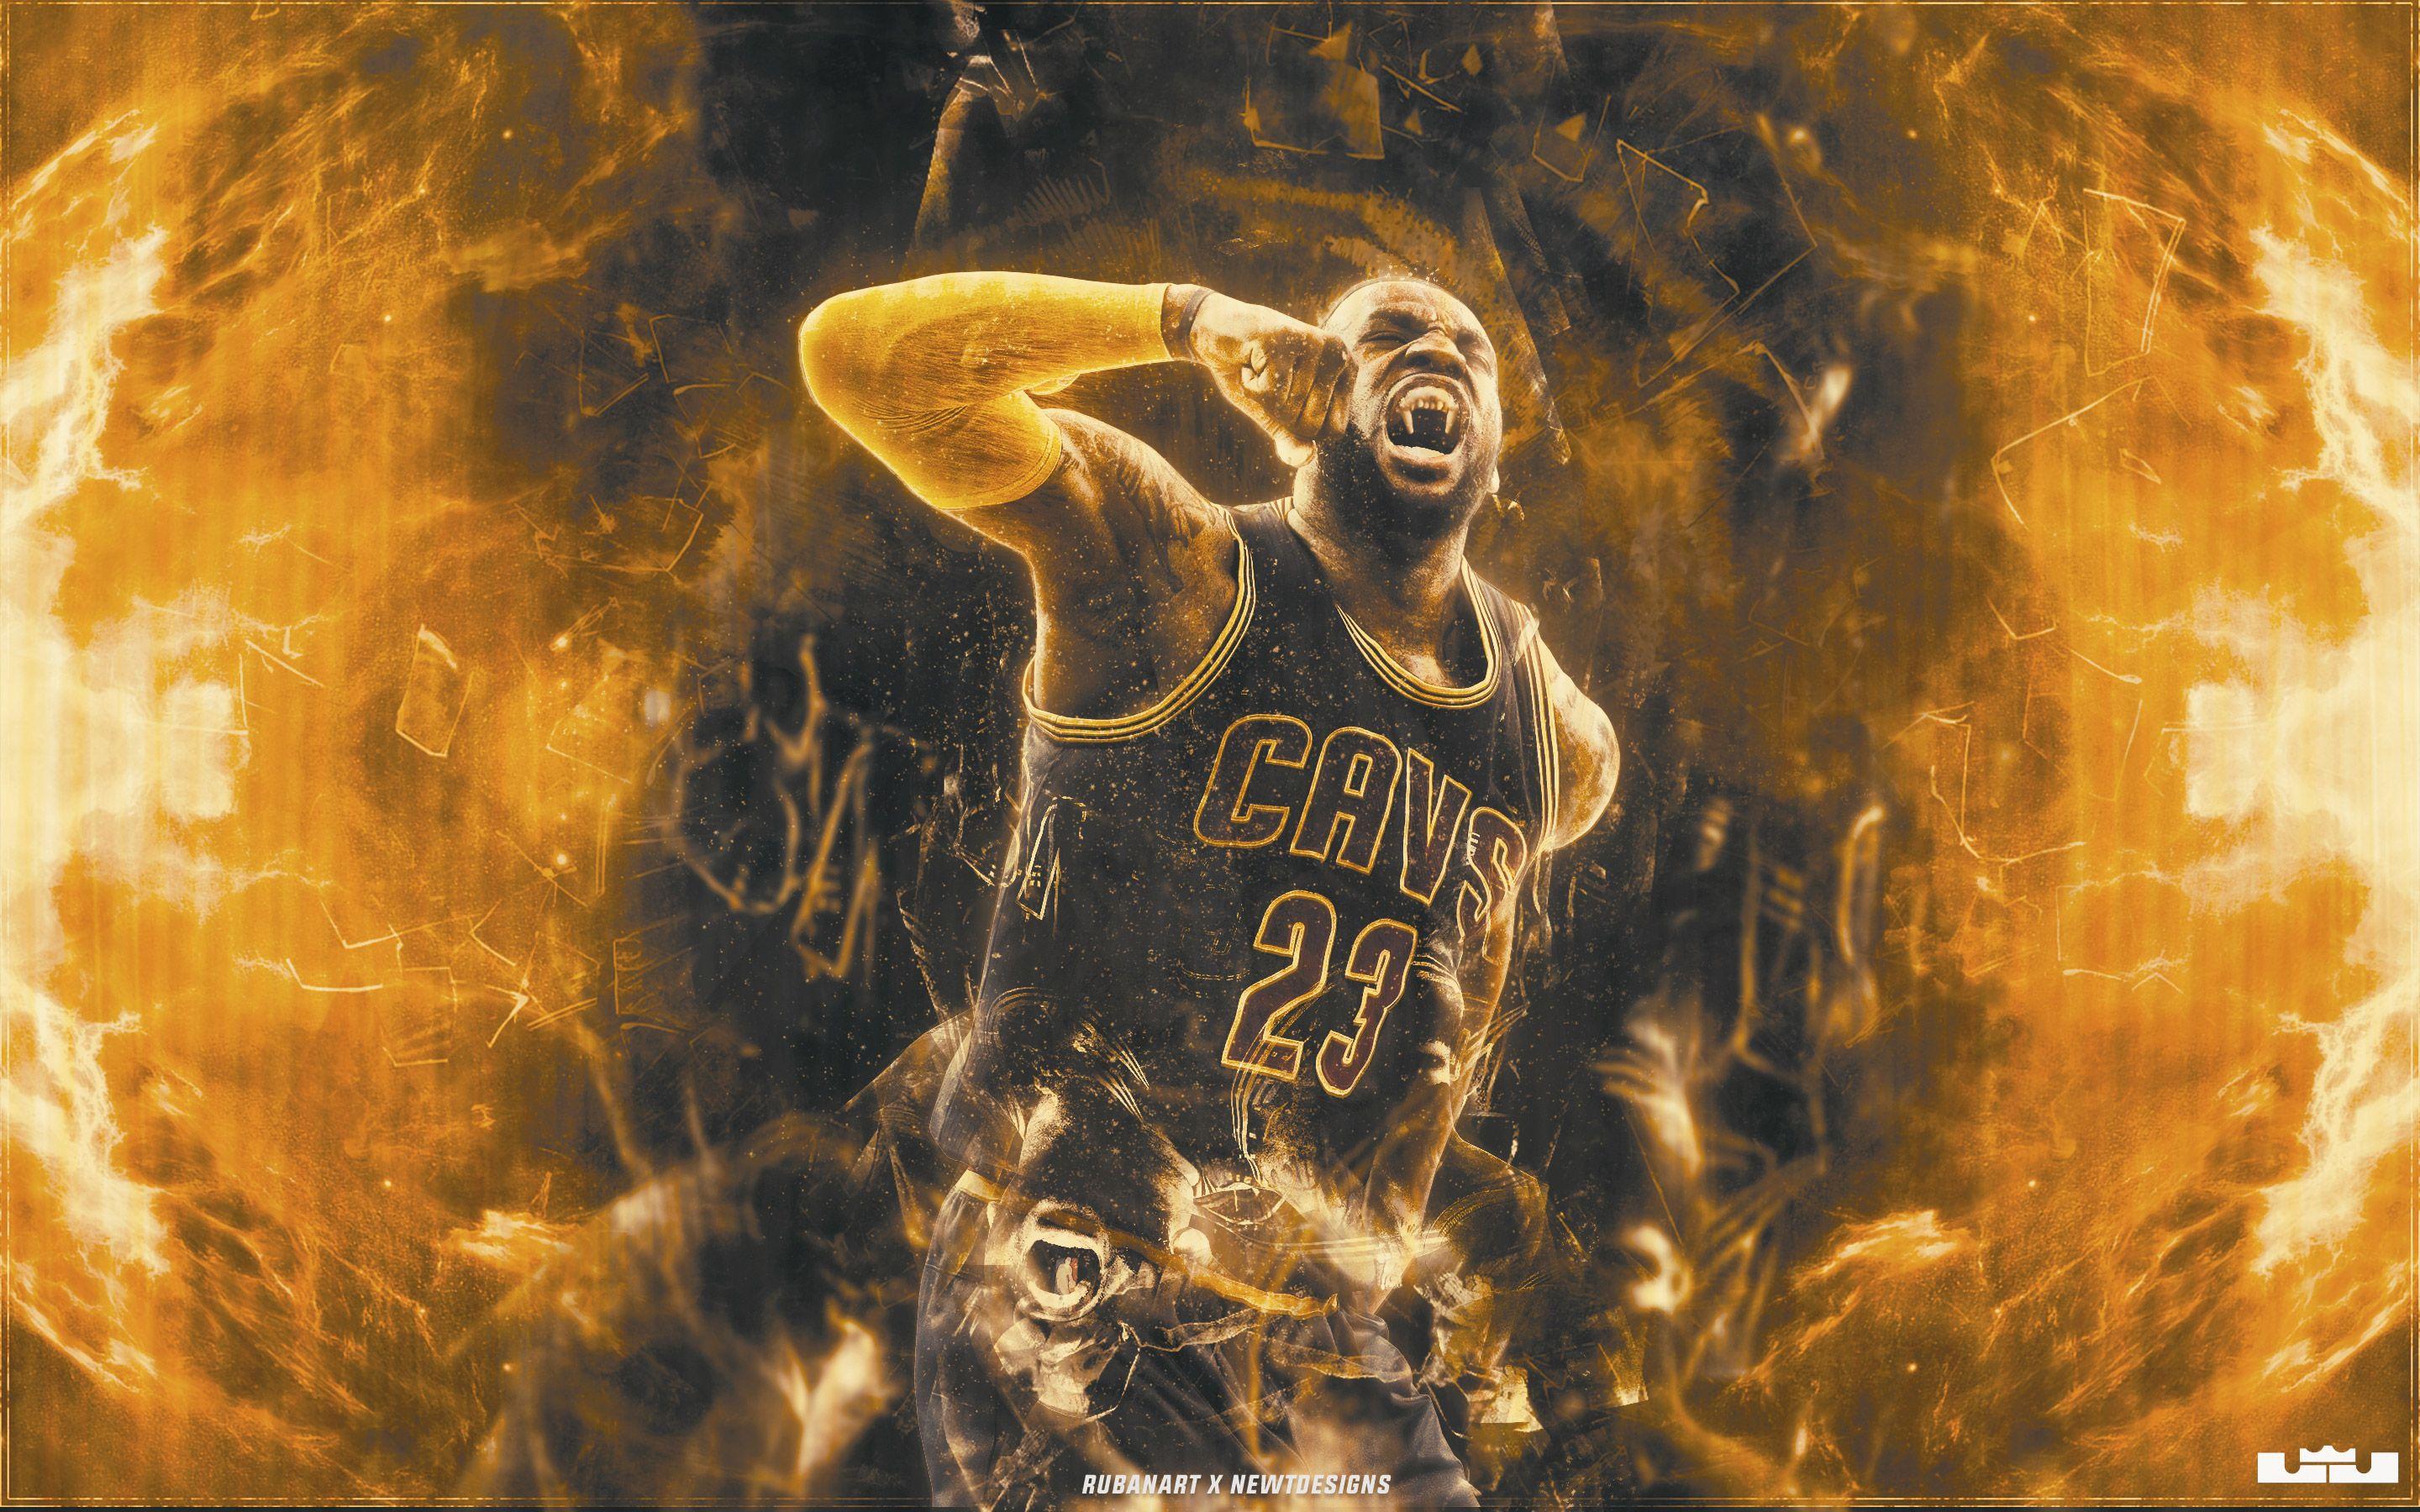 LeBron James Wallpaper With Cavs 2018. LeBron James and Wallpaper